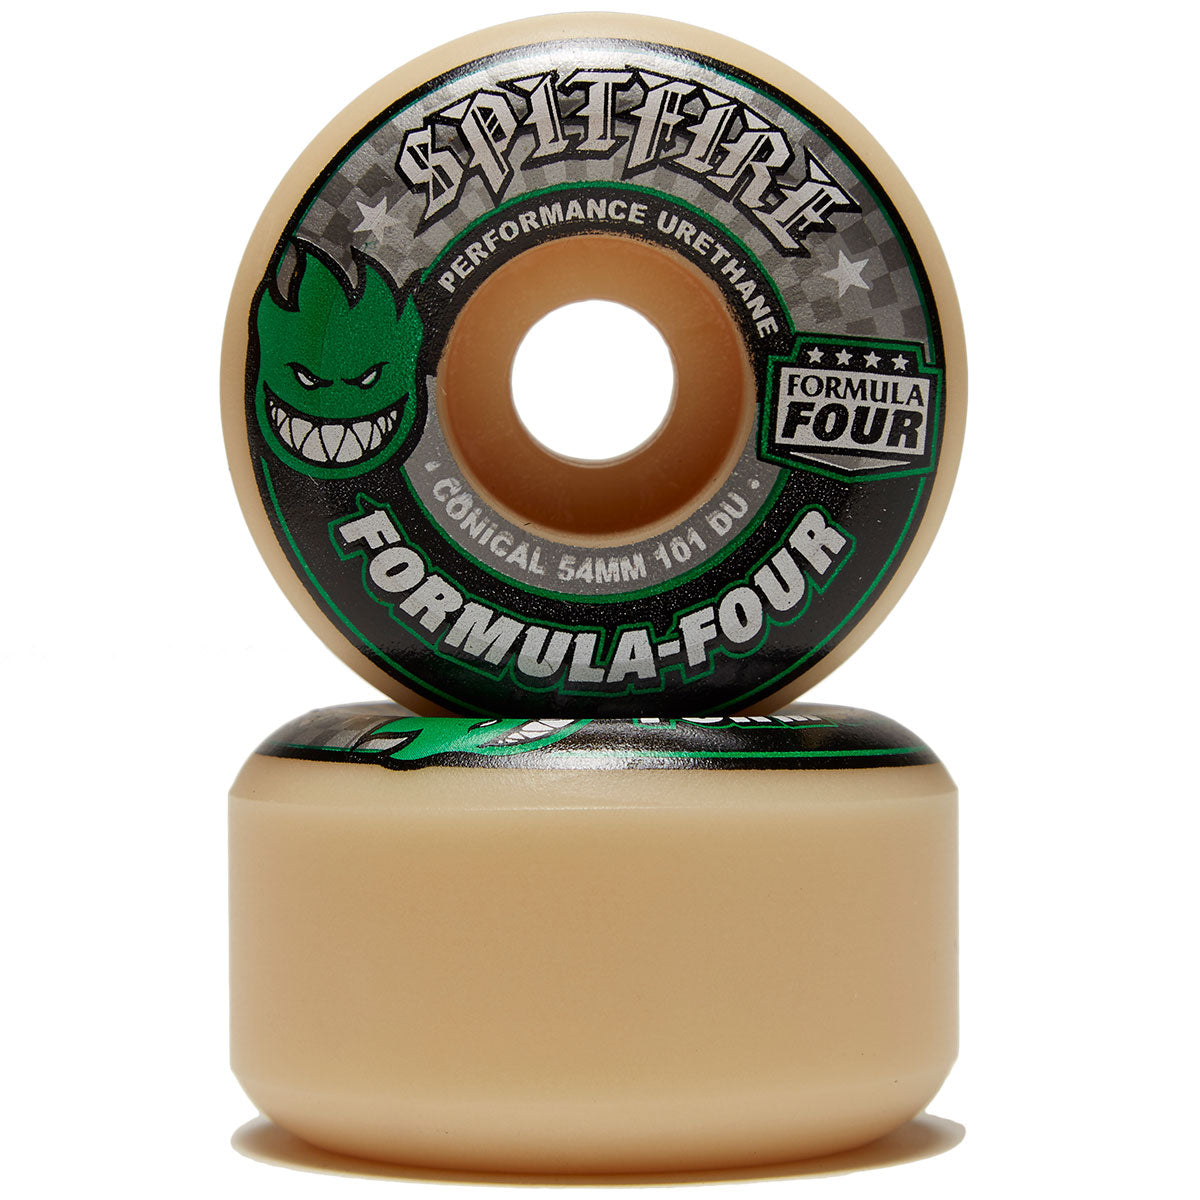 Spitfire F4 Conical 101a Skateboard Wheels - Natural - 54mm image 2